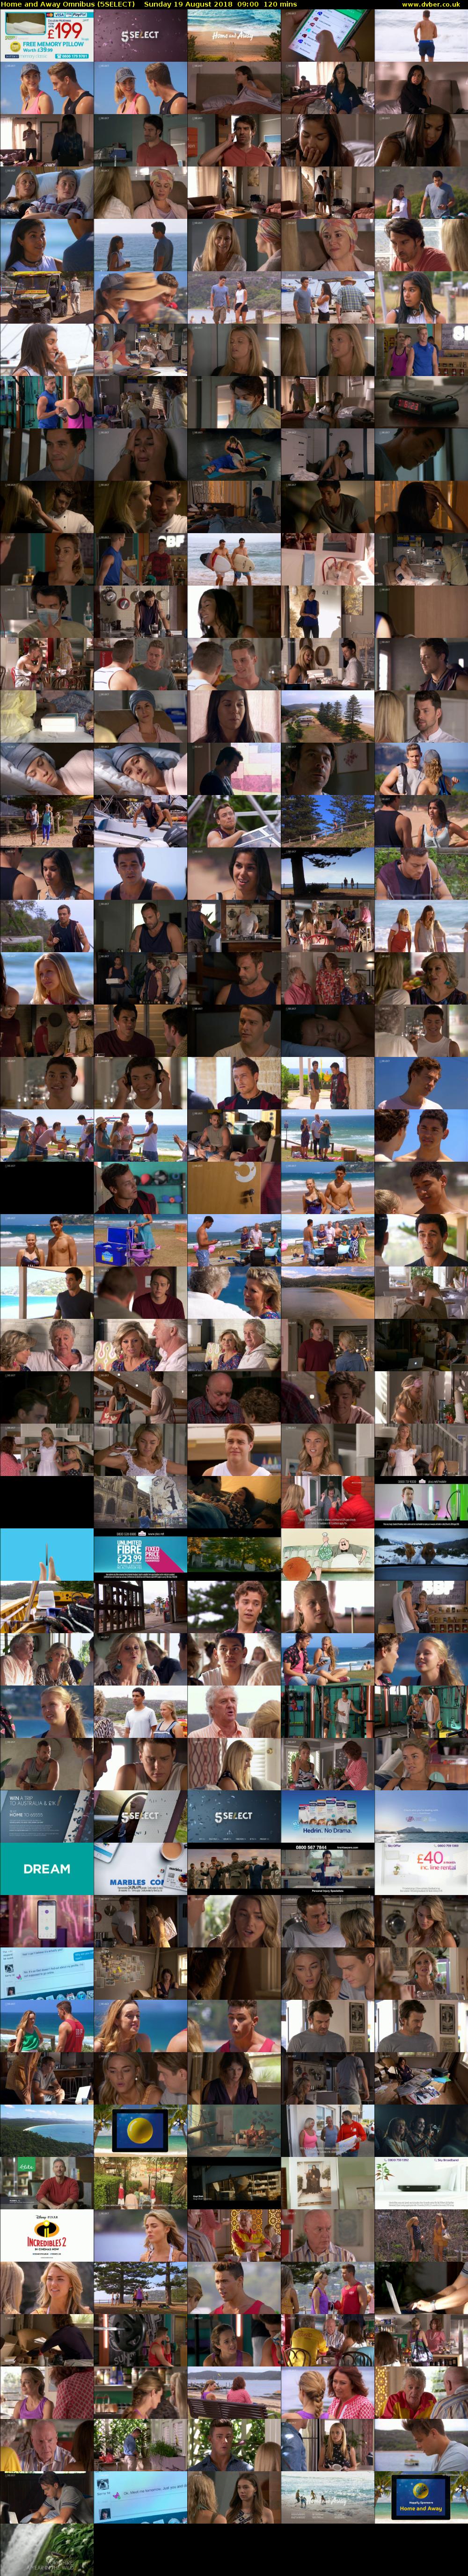 Home and Away Omnibus (5SELECT) Sunday 19 August 2018 09:00 - 11:00